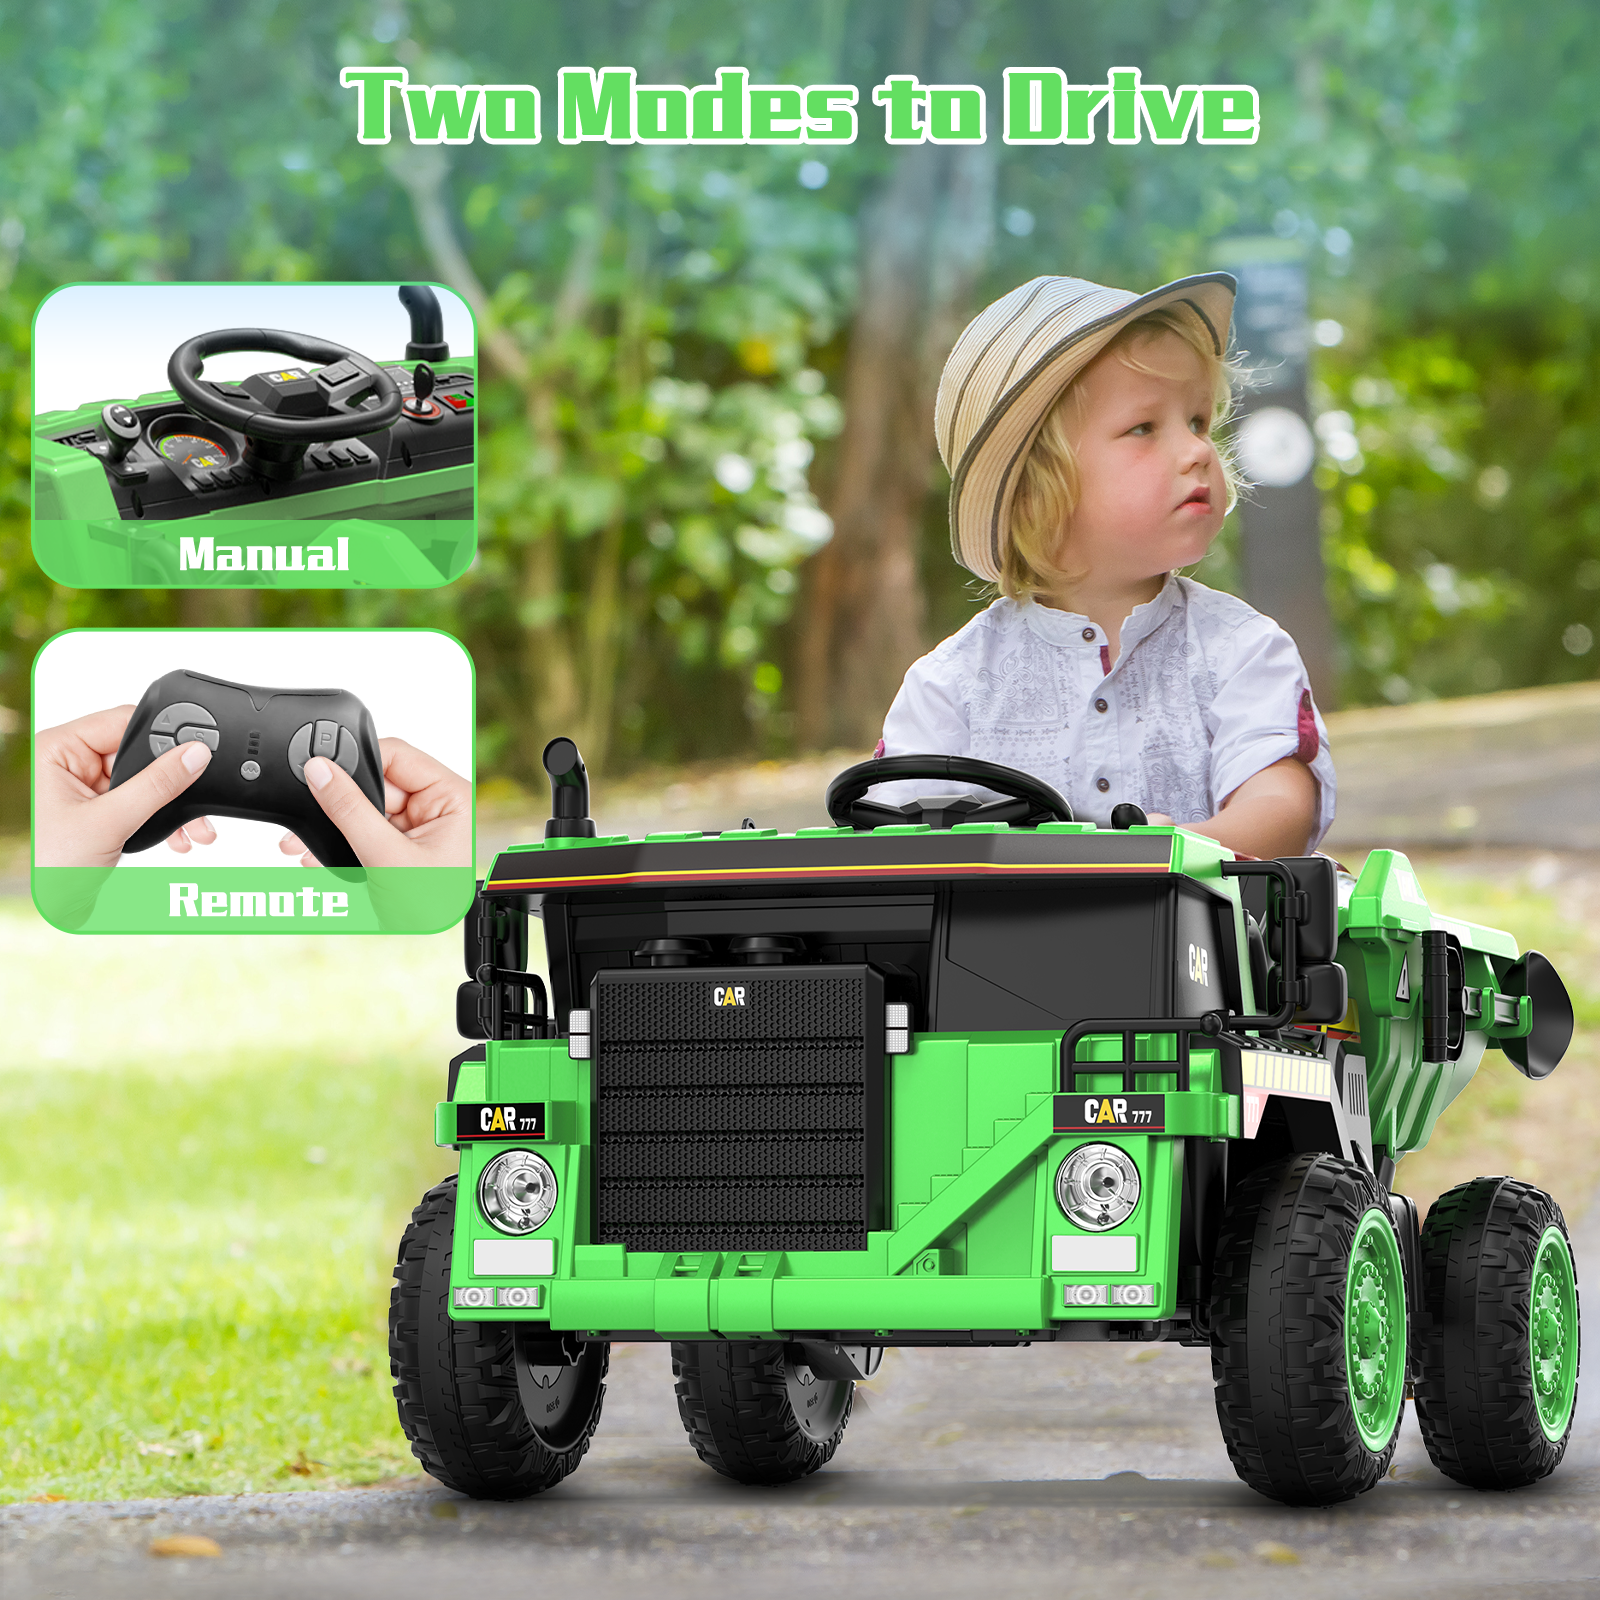 TOKTOO 12Volt Battery Powered Ride on Tractor w/ Remote Control, Music Player, Electric Dump Bed-Green - image 4 of 13